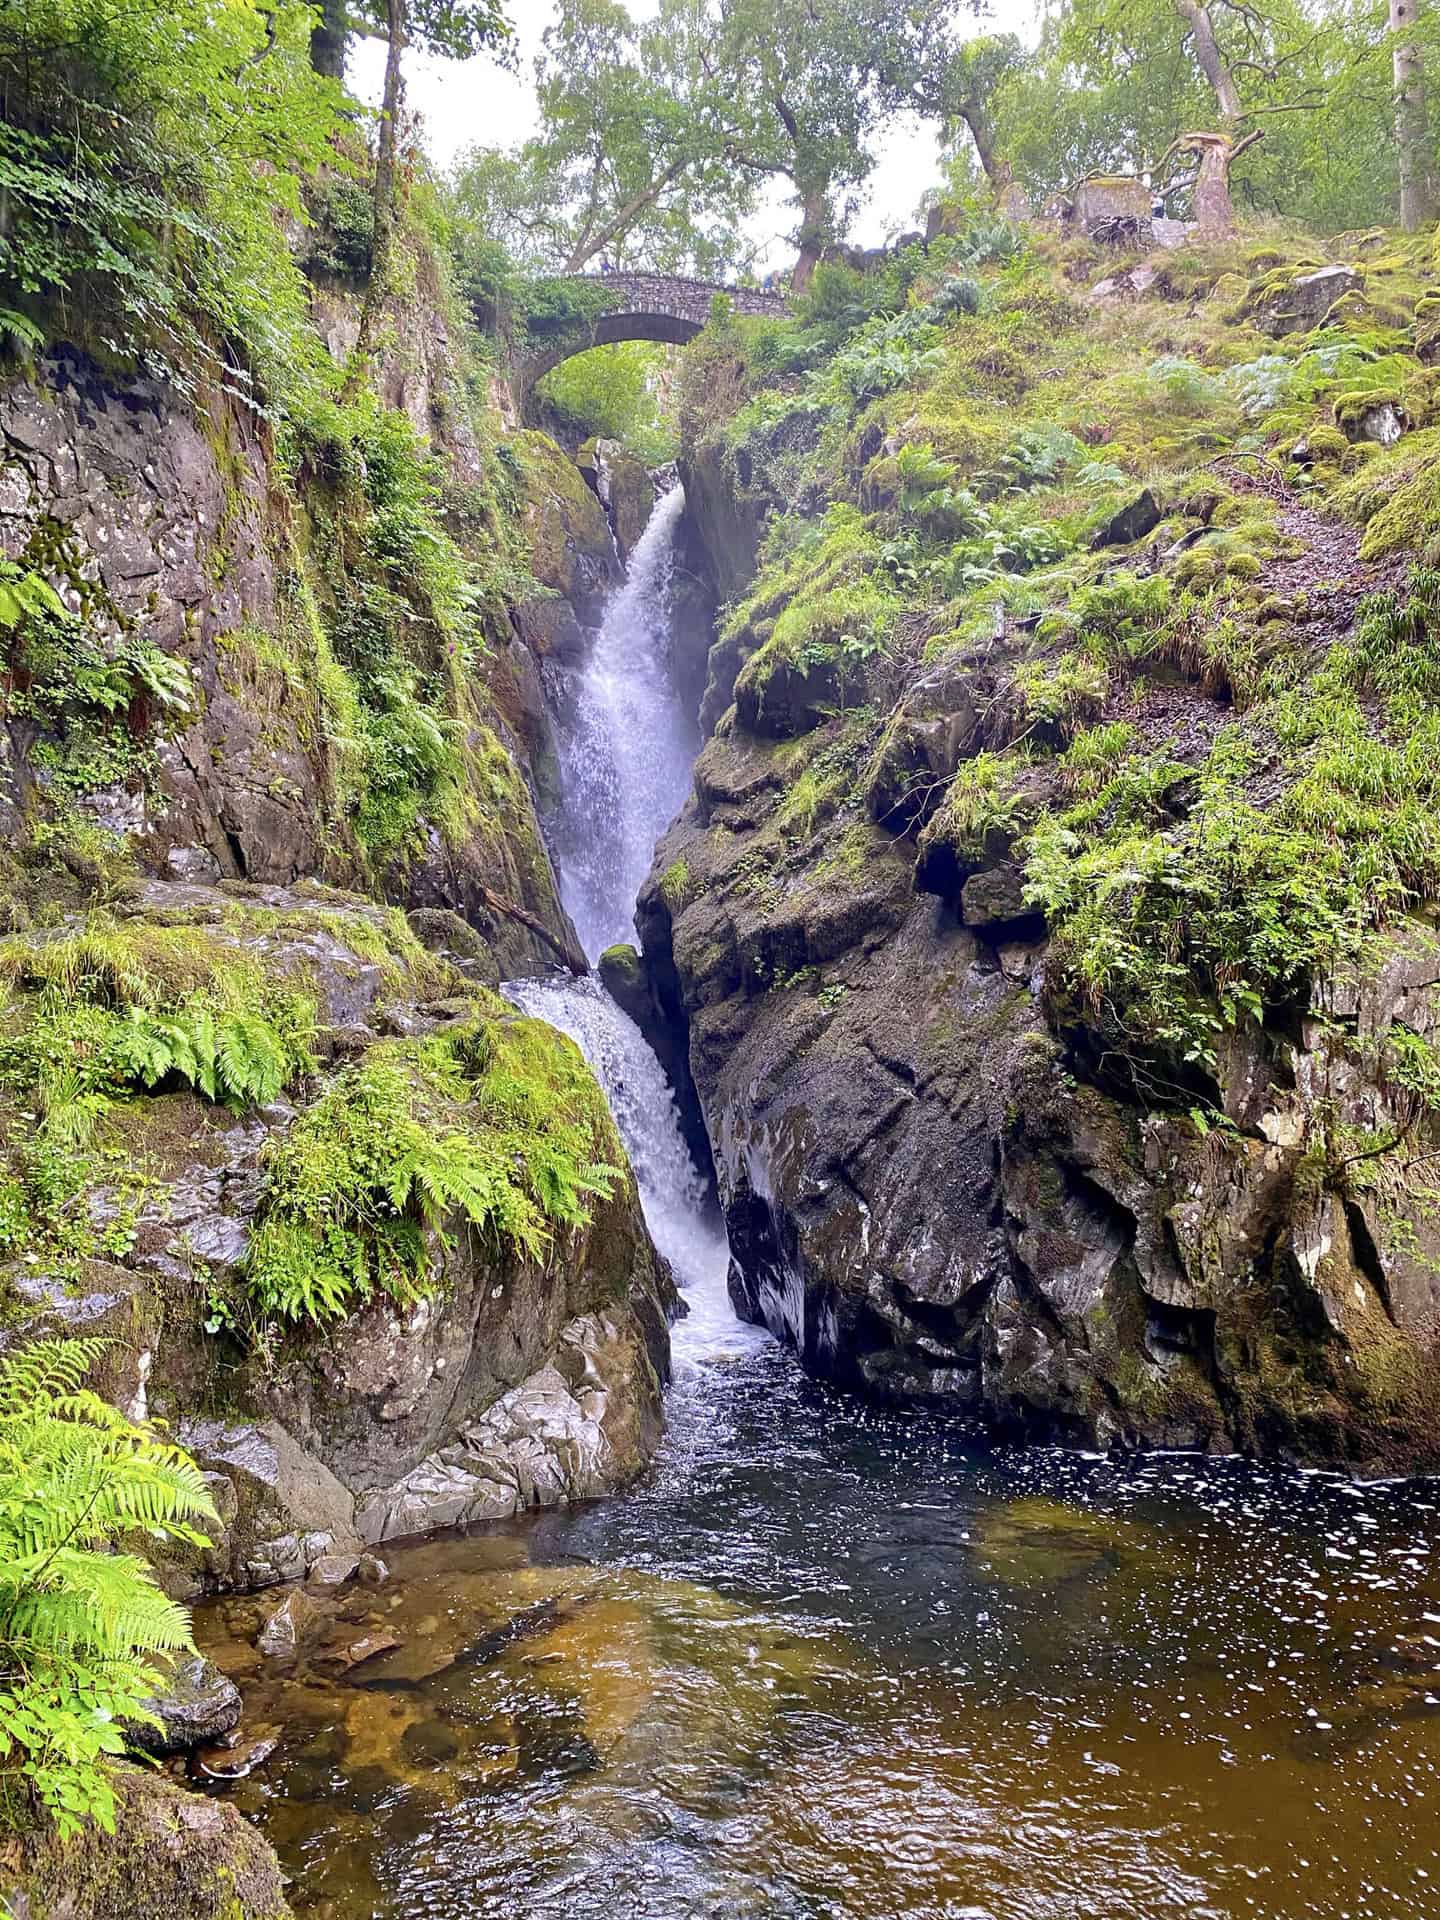 Aira Beck drops approximately 20 metres down a steep-sided ravine into a rocky plunge pool before continuing its journey to Ullswater.